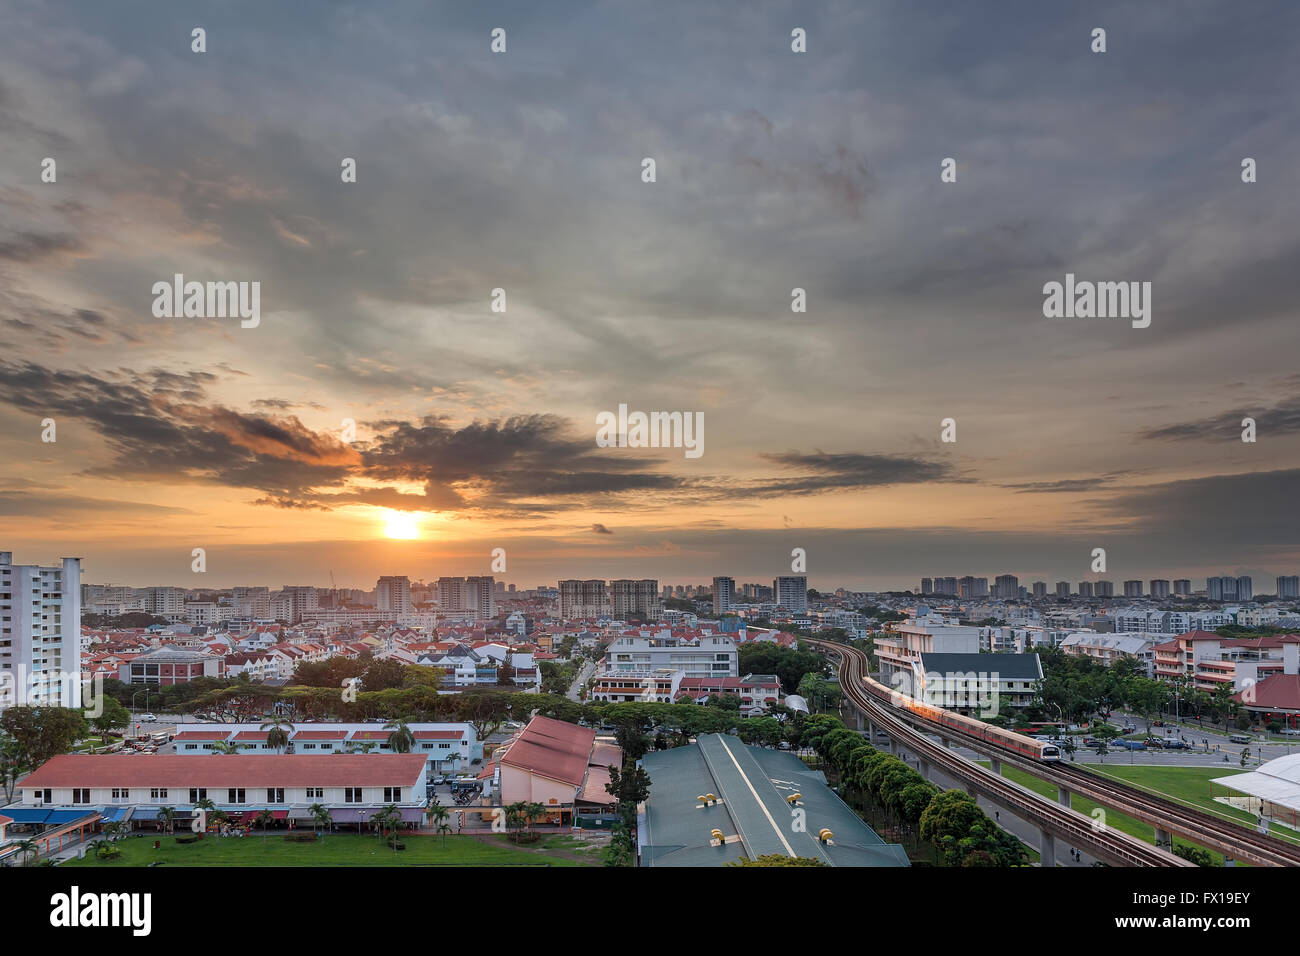 Sunrise over Eunos residential area by MRT train station in Singapore Stock Photo